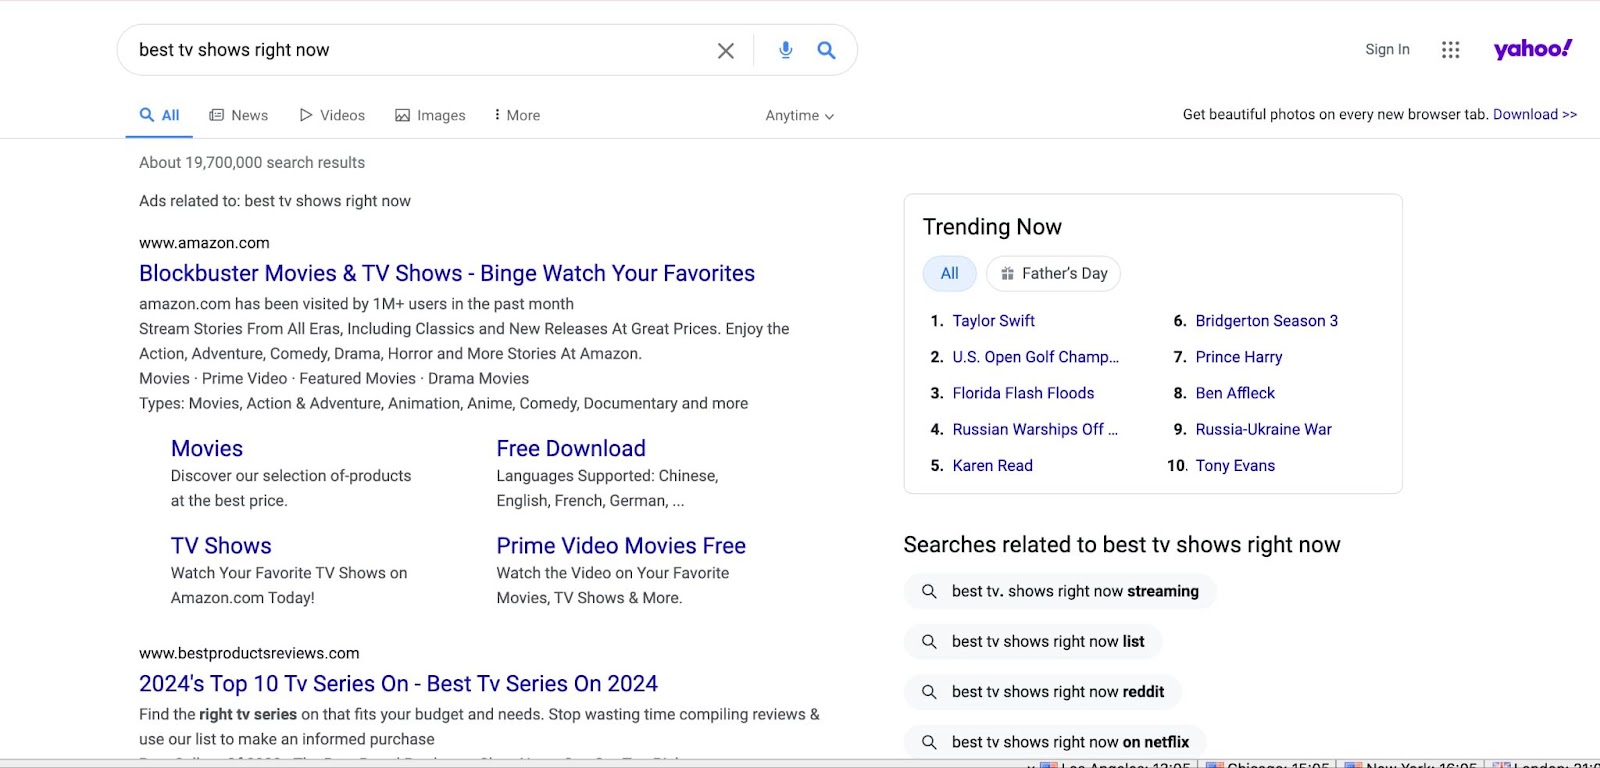 Yahoo! search results page for “best TV shows right now.”